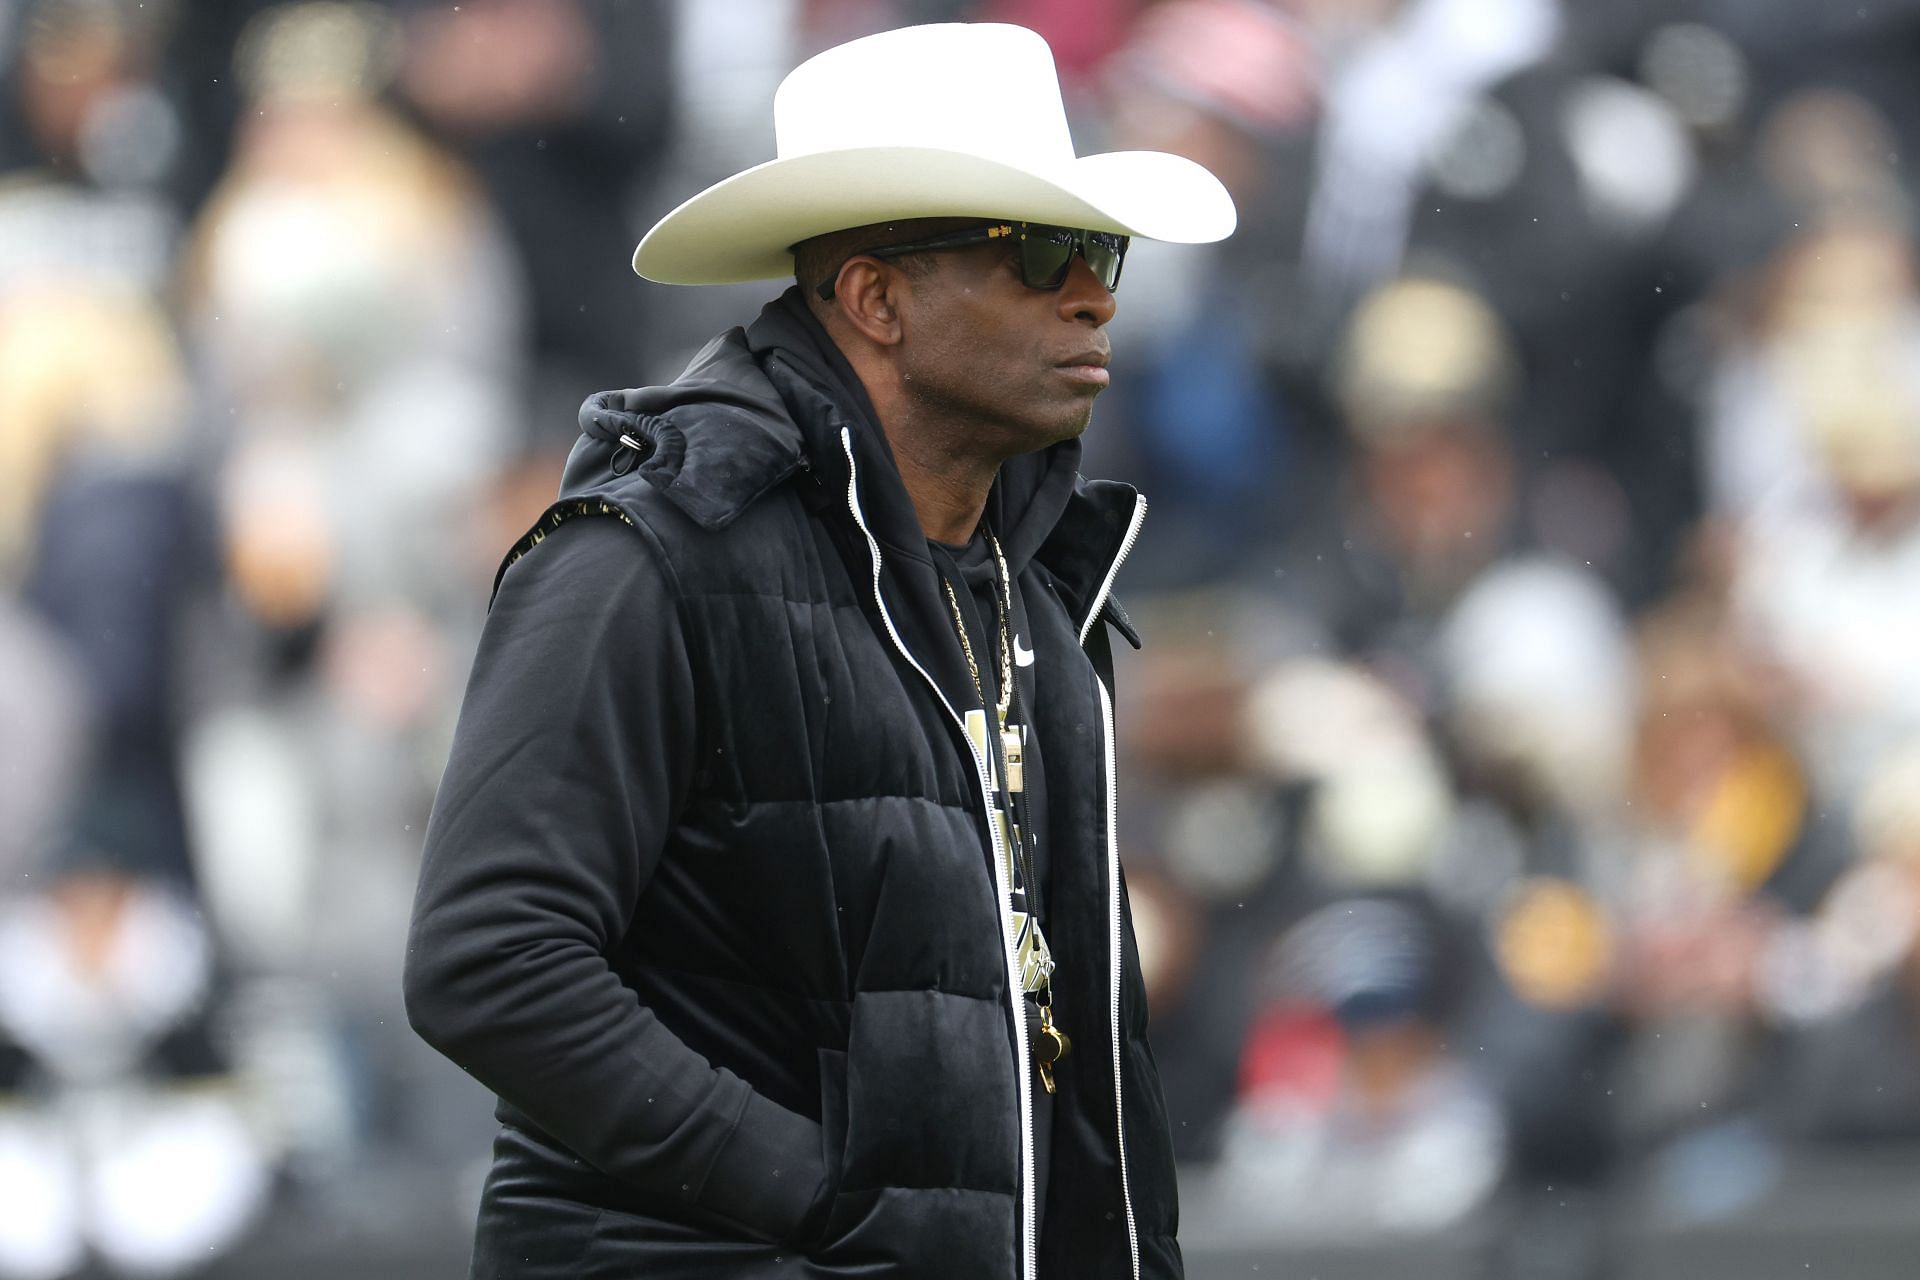 Deion Sanders had starring role in Yankees' clown show